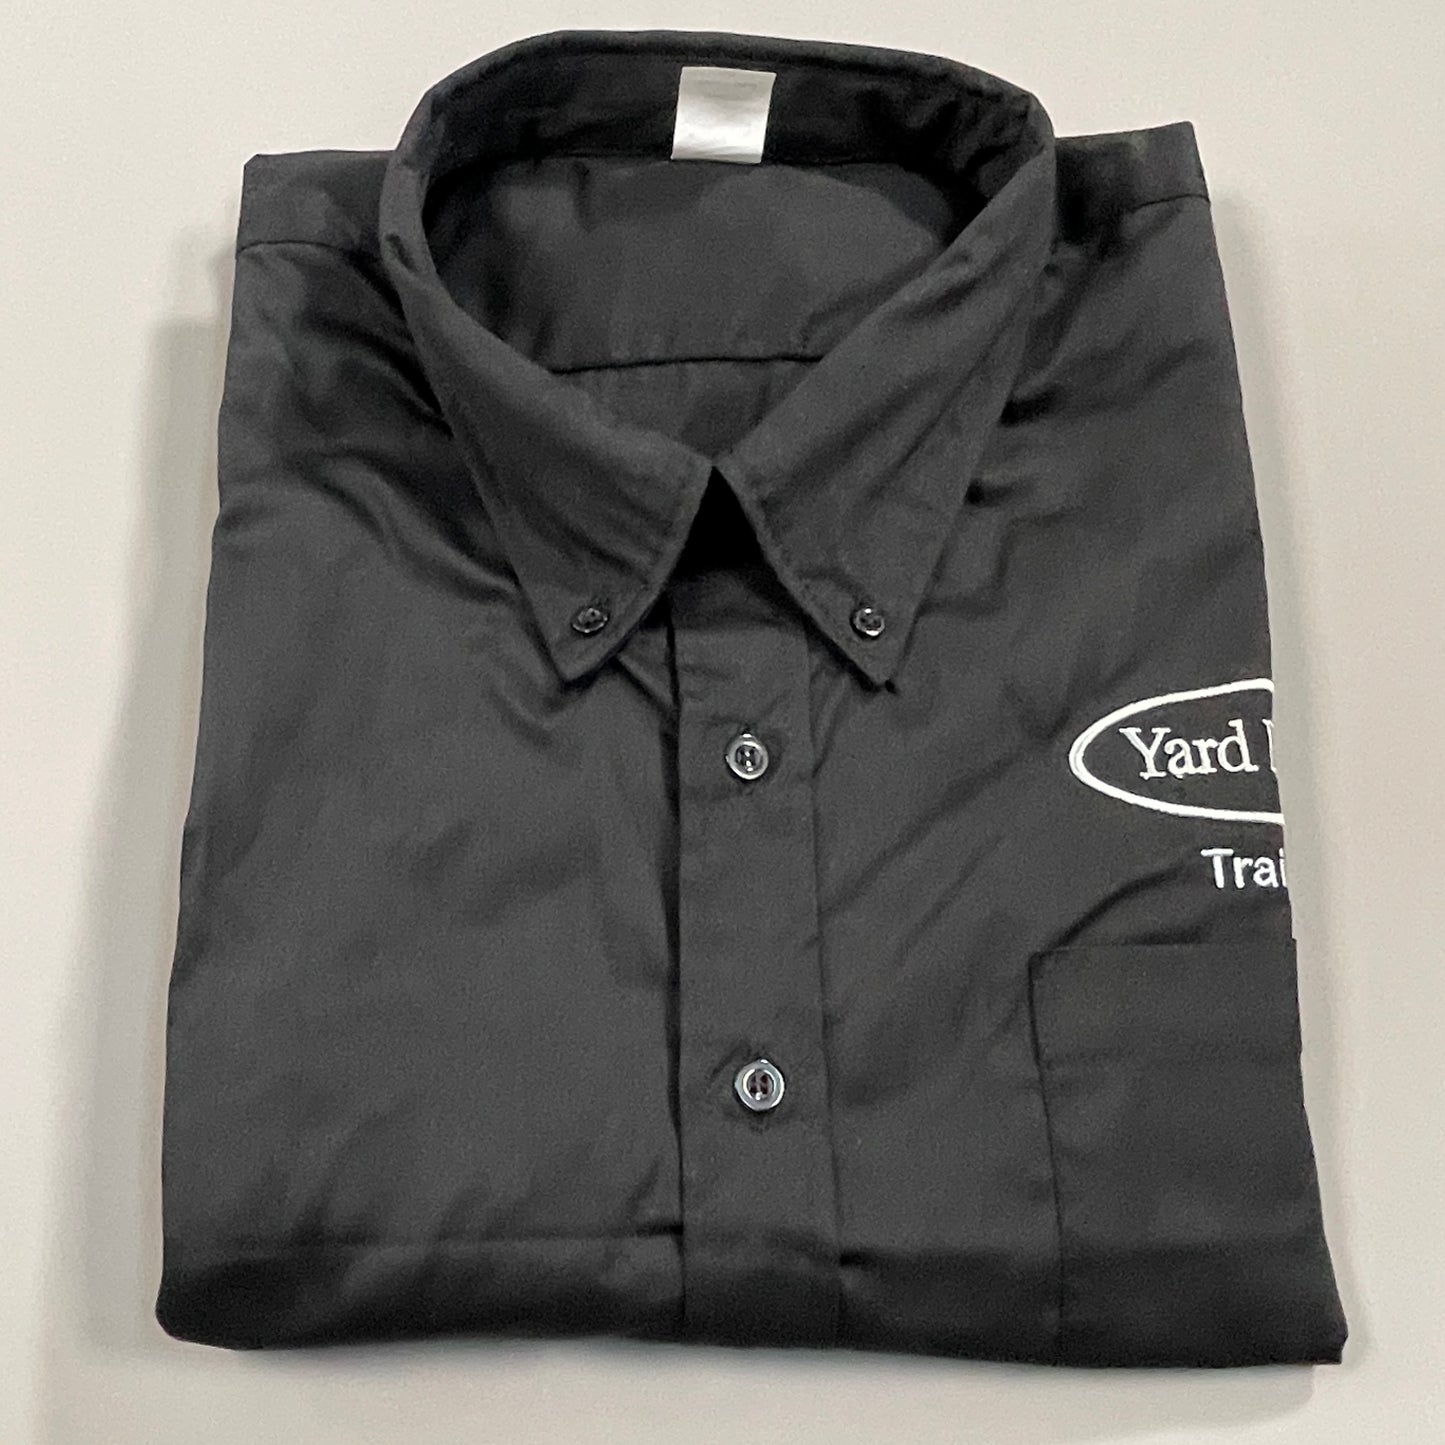 YARD HOUSE Employee "Trainer" Button Up Collared Shirt Men's Sz L Black (New)